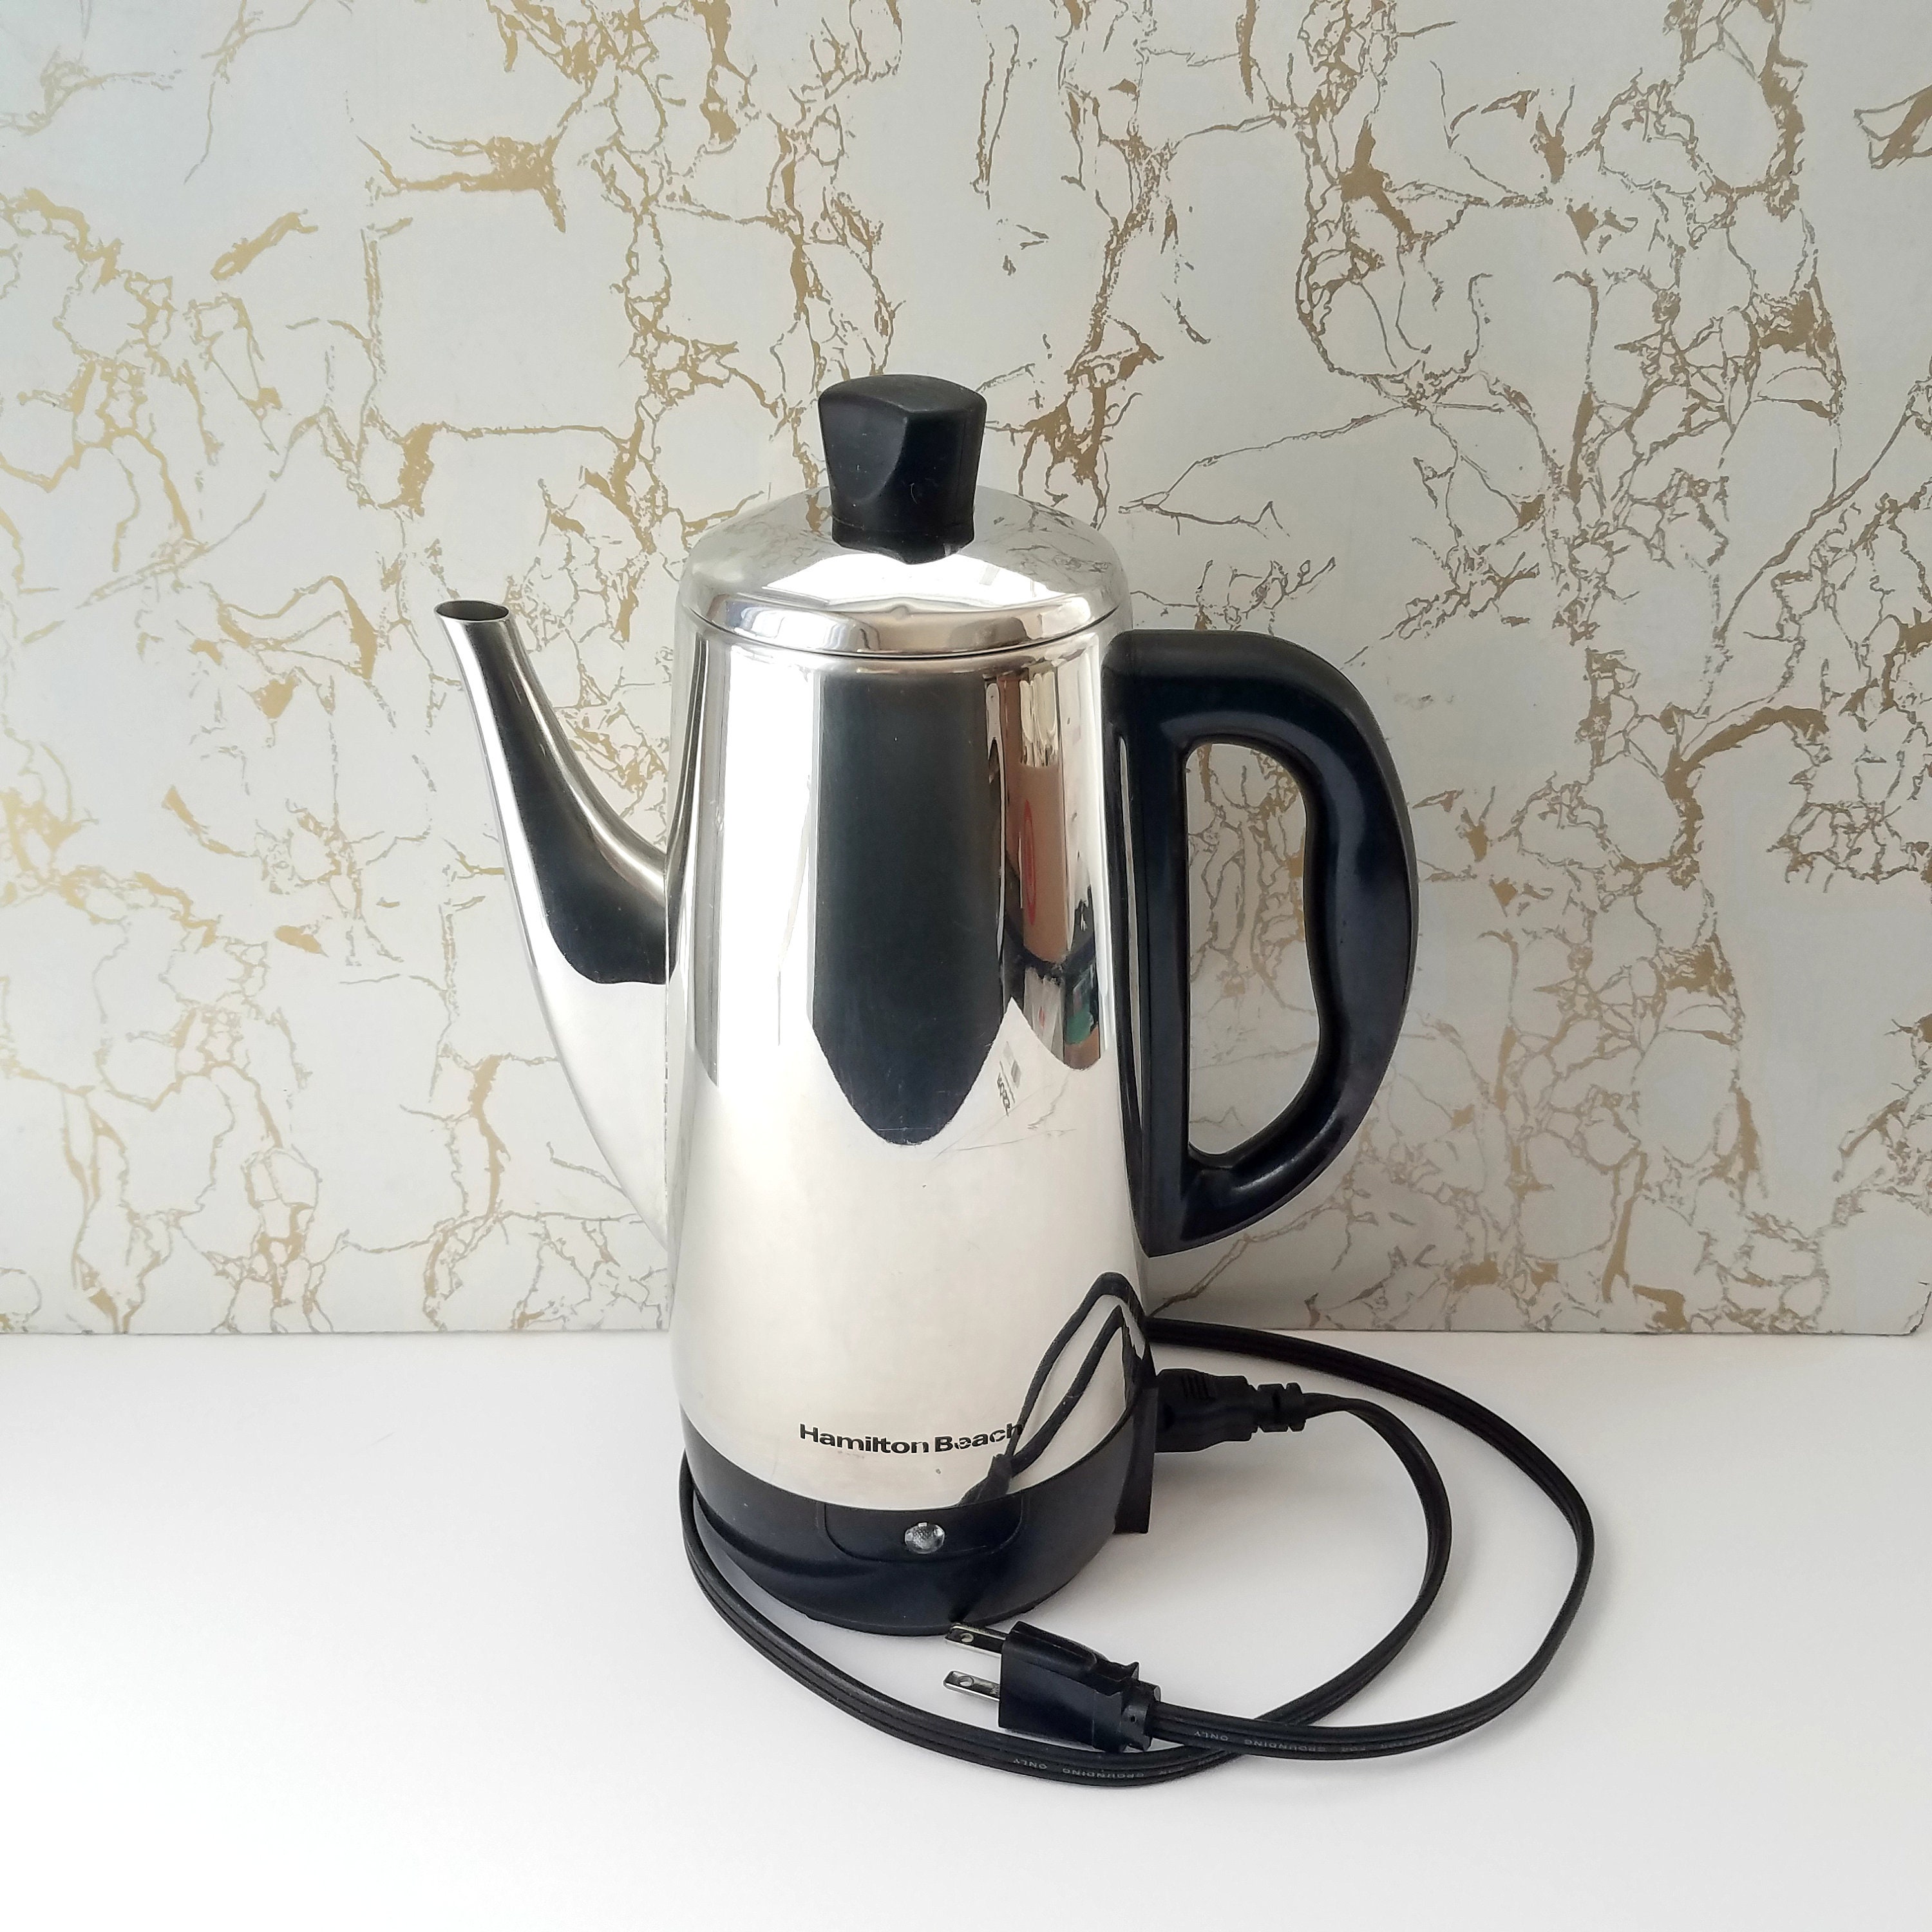 Hamilton Beach 40616R 12 Cup Electric Percolator Coffee Maker - Stainless  Steel